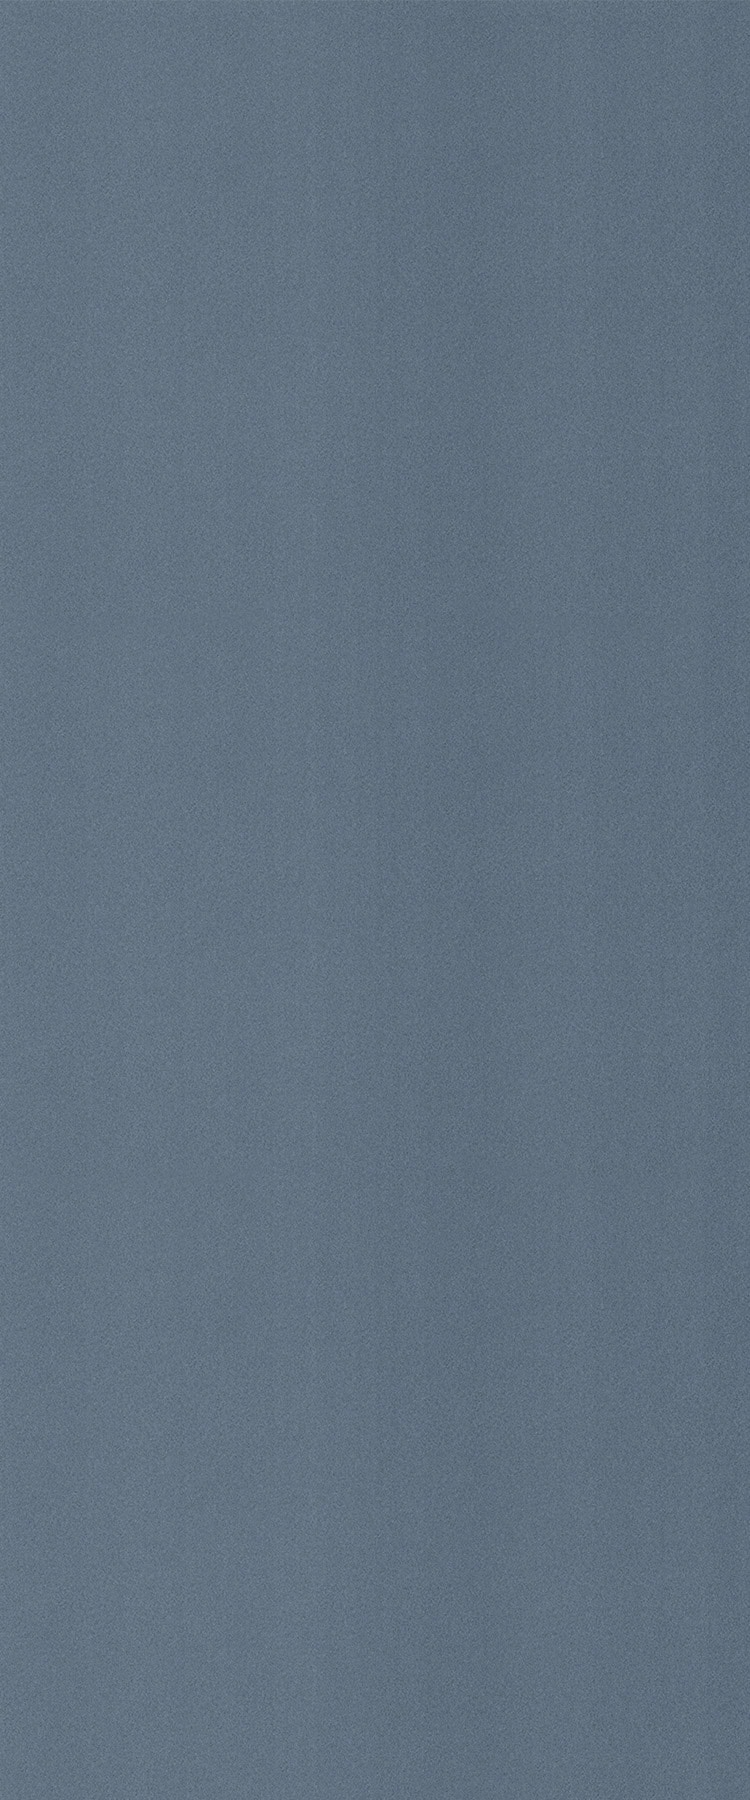 FORMICA 4 ft. x 8 ft. Laminate Sheet in Blue Felt with Matte Finish  093201258408000 - The Home Depot